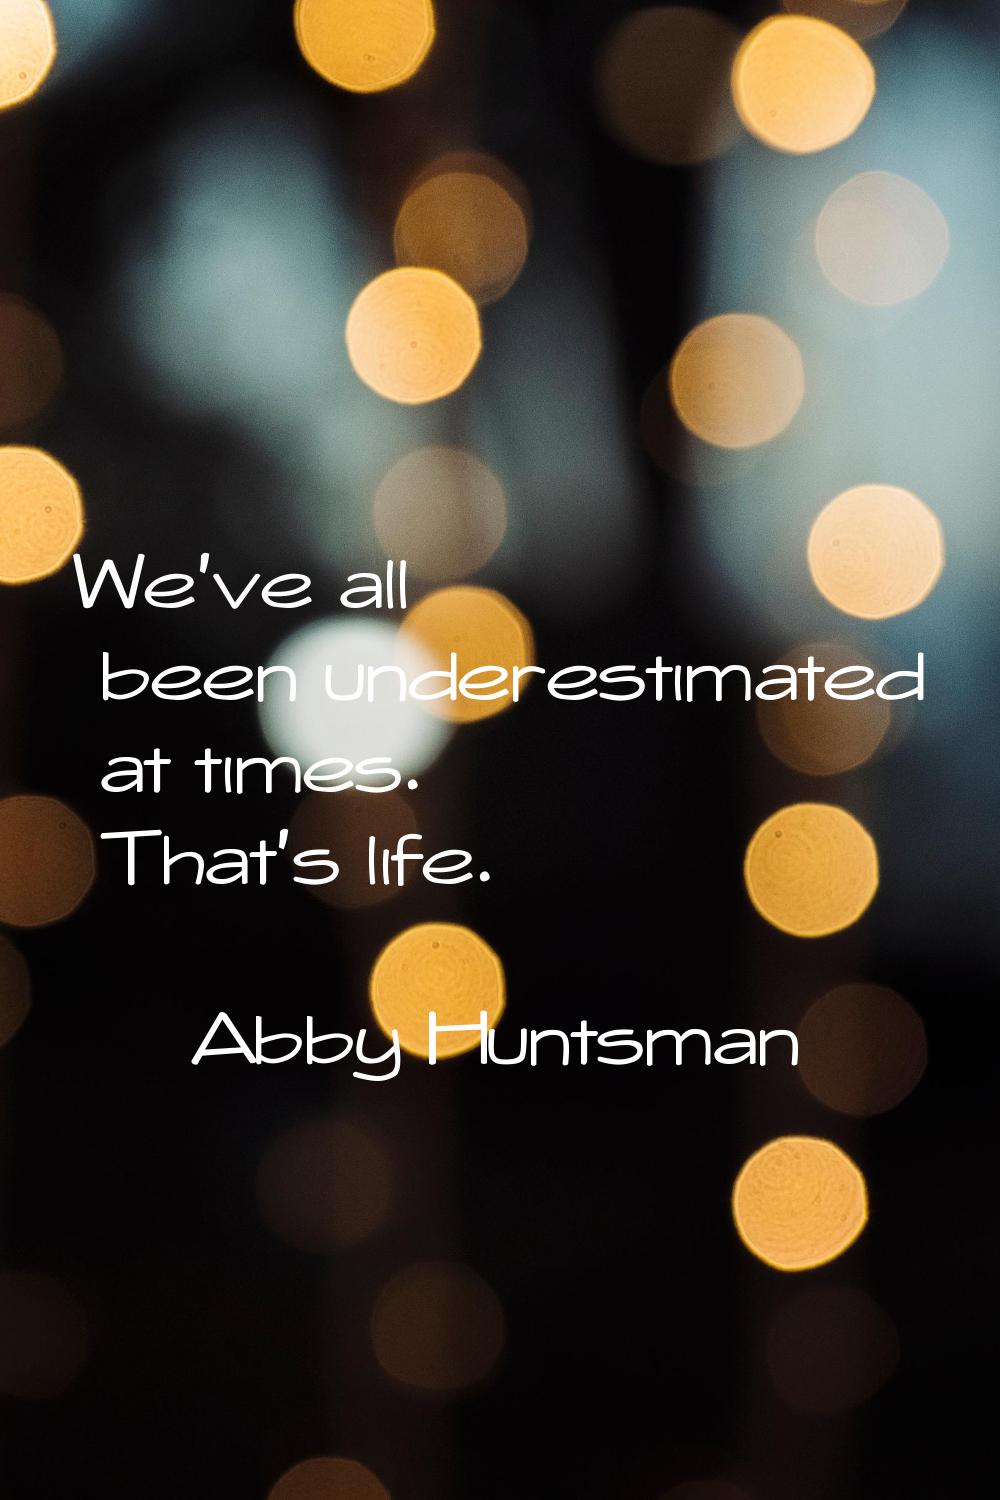 We've all been underestimated at times. That's life.